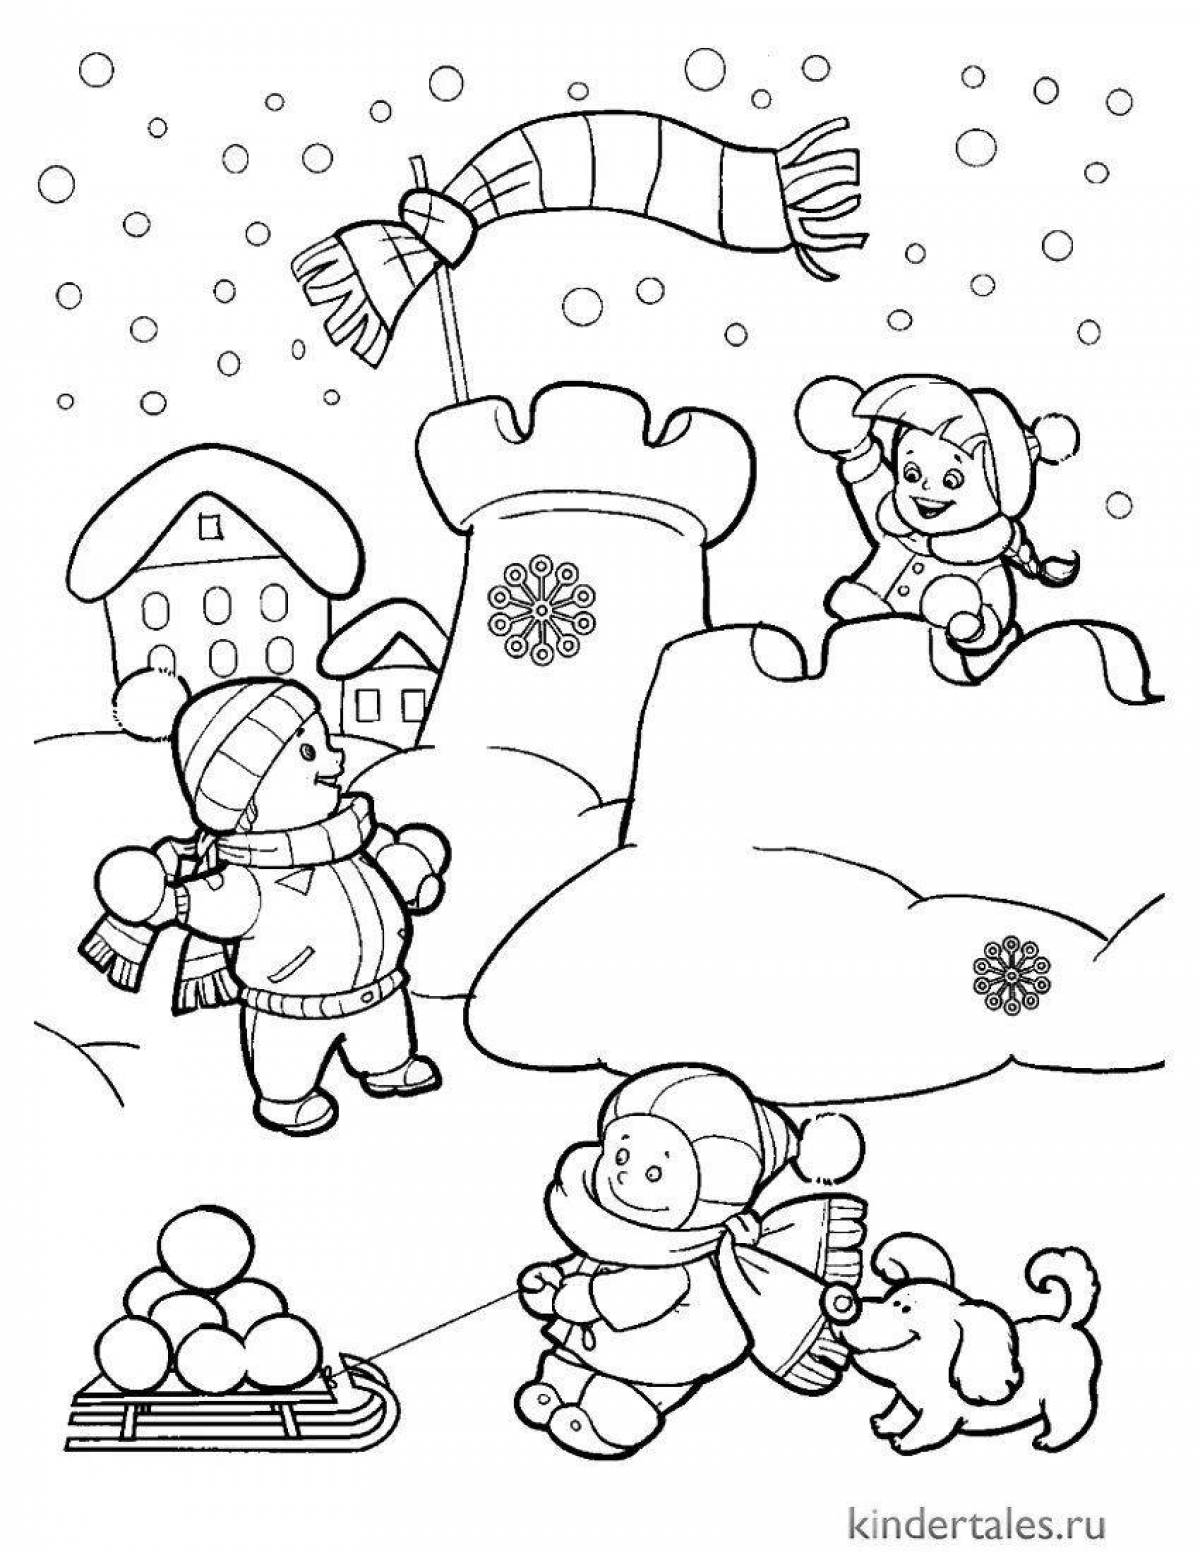 Blissful children's winter coloring book